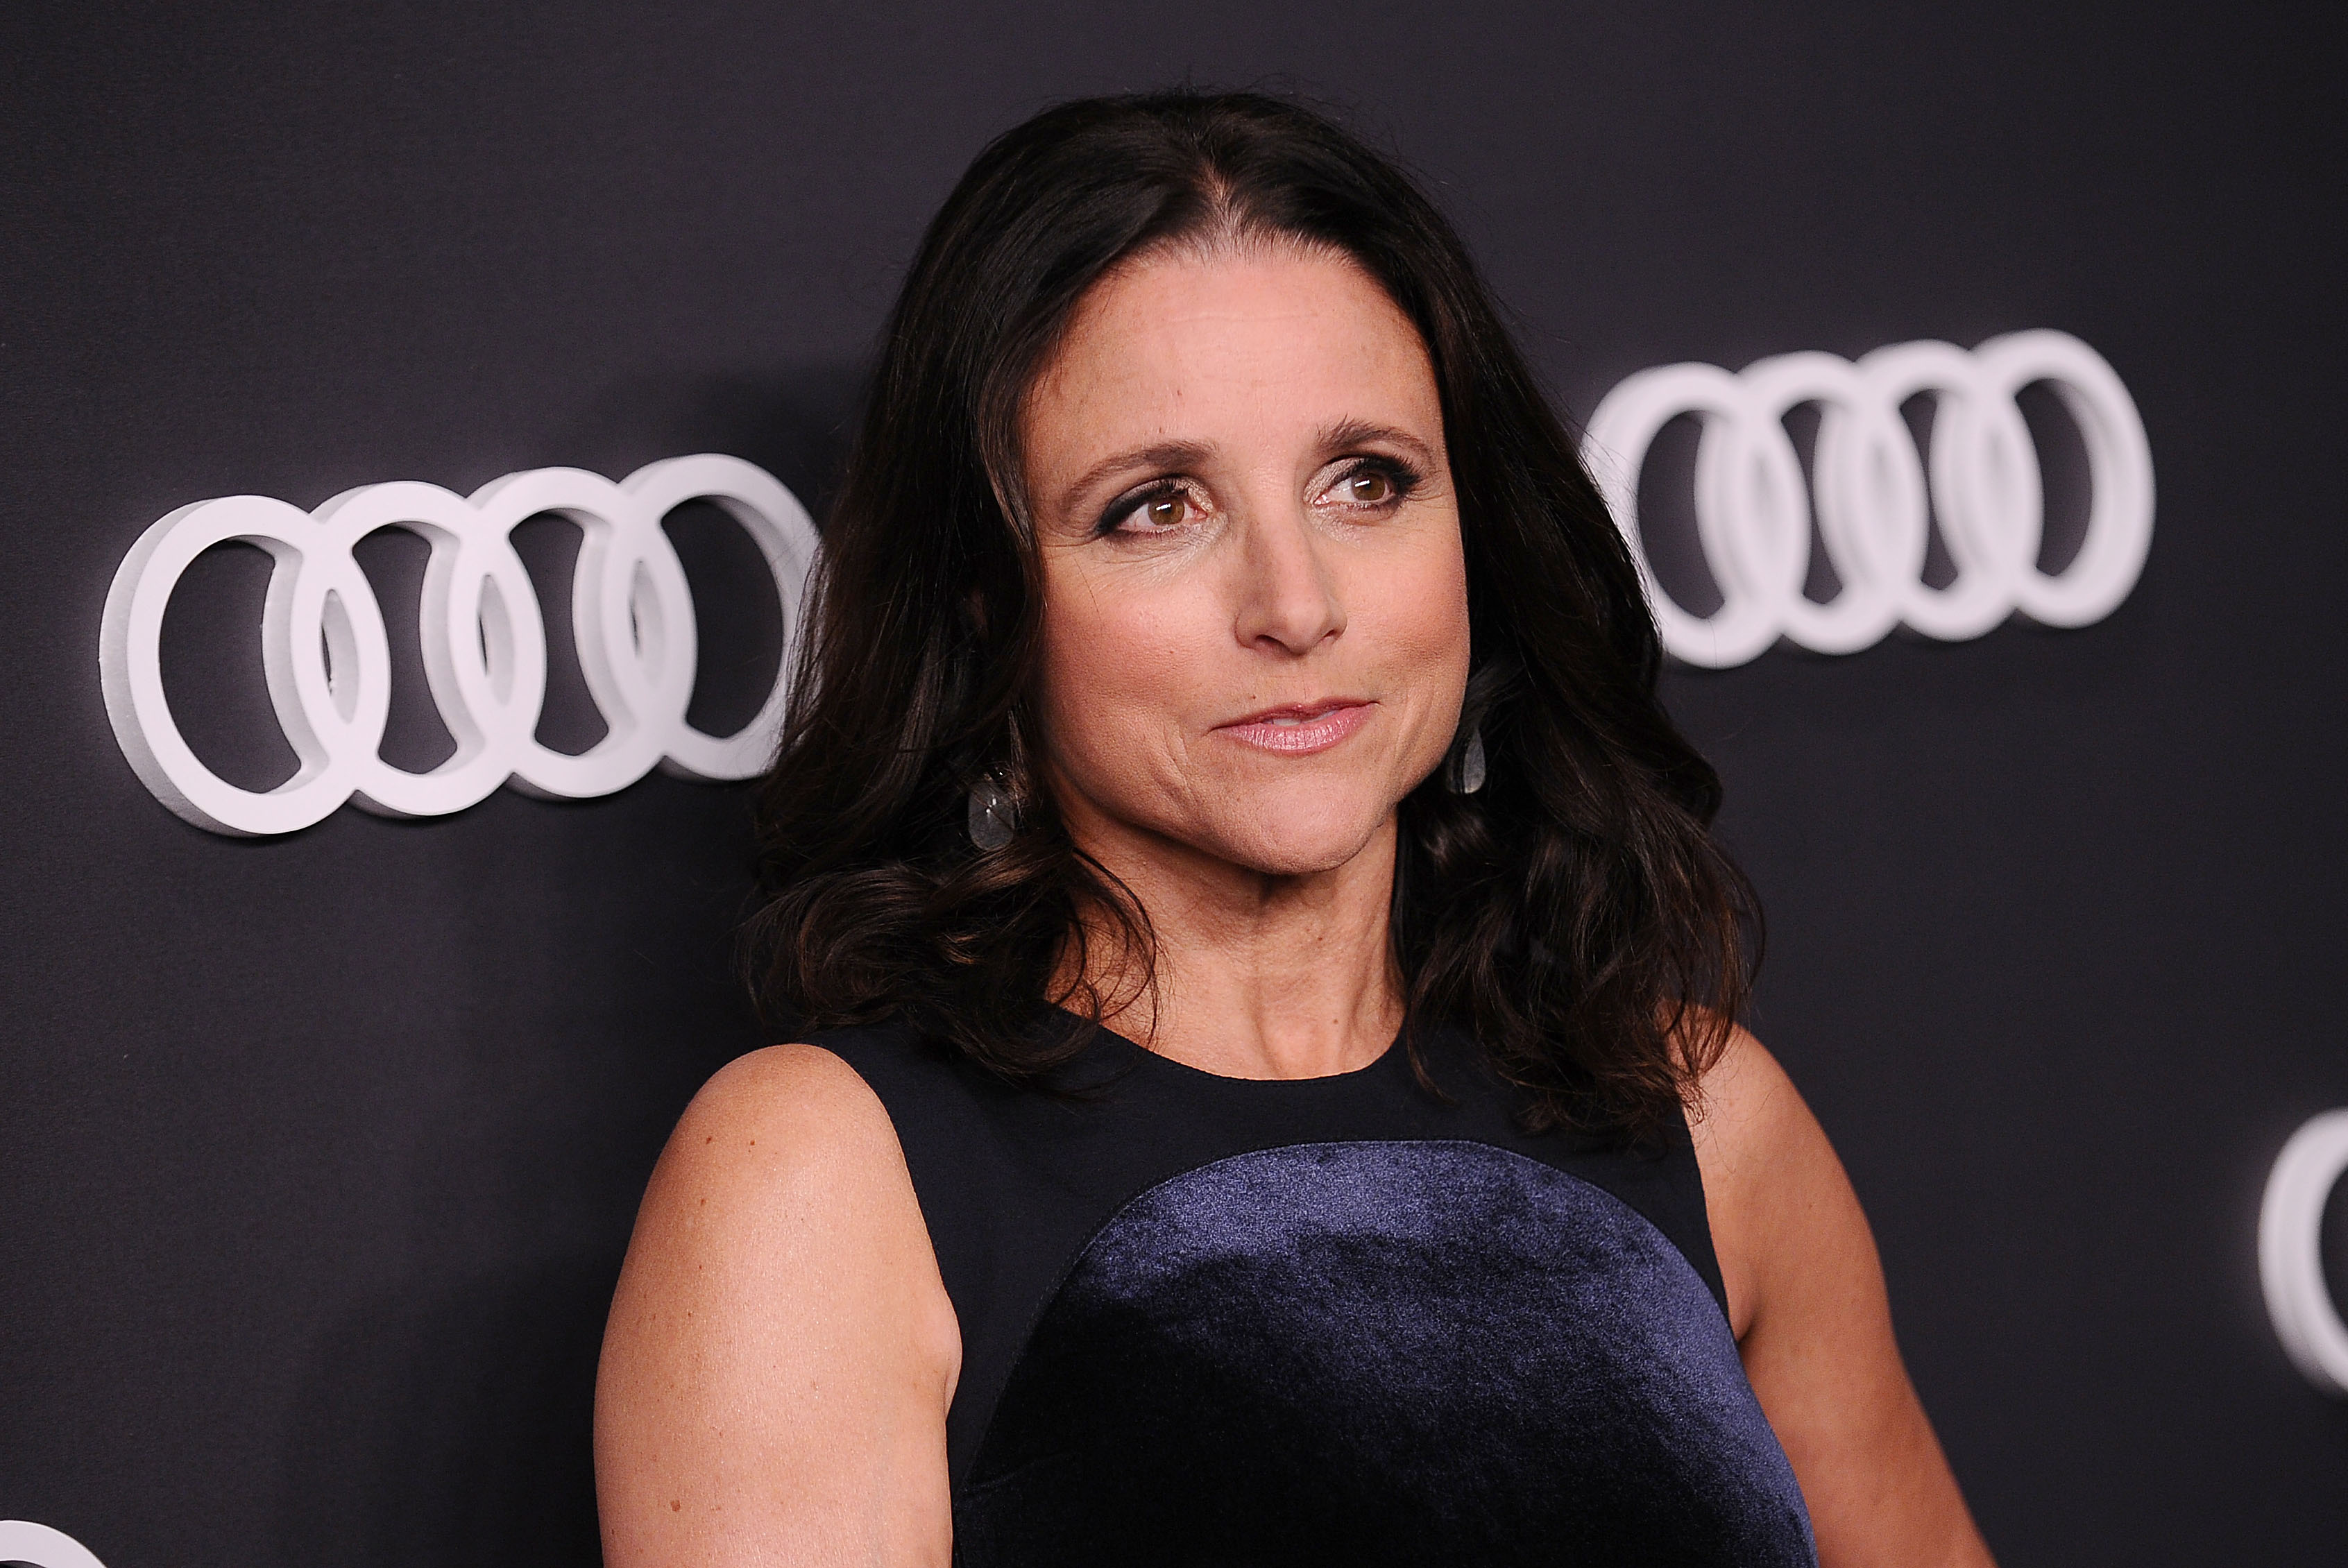 Actress Julia Louis-Dreyfus attends the Audi celebration for the 69th Emmys at The Highlight Room at the Dream Hollywood on September 14, 2017 in Hollywood, California. (Jason LaVeris - FilmMagic/Getty Images)